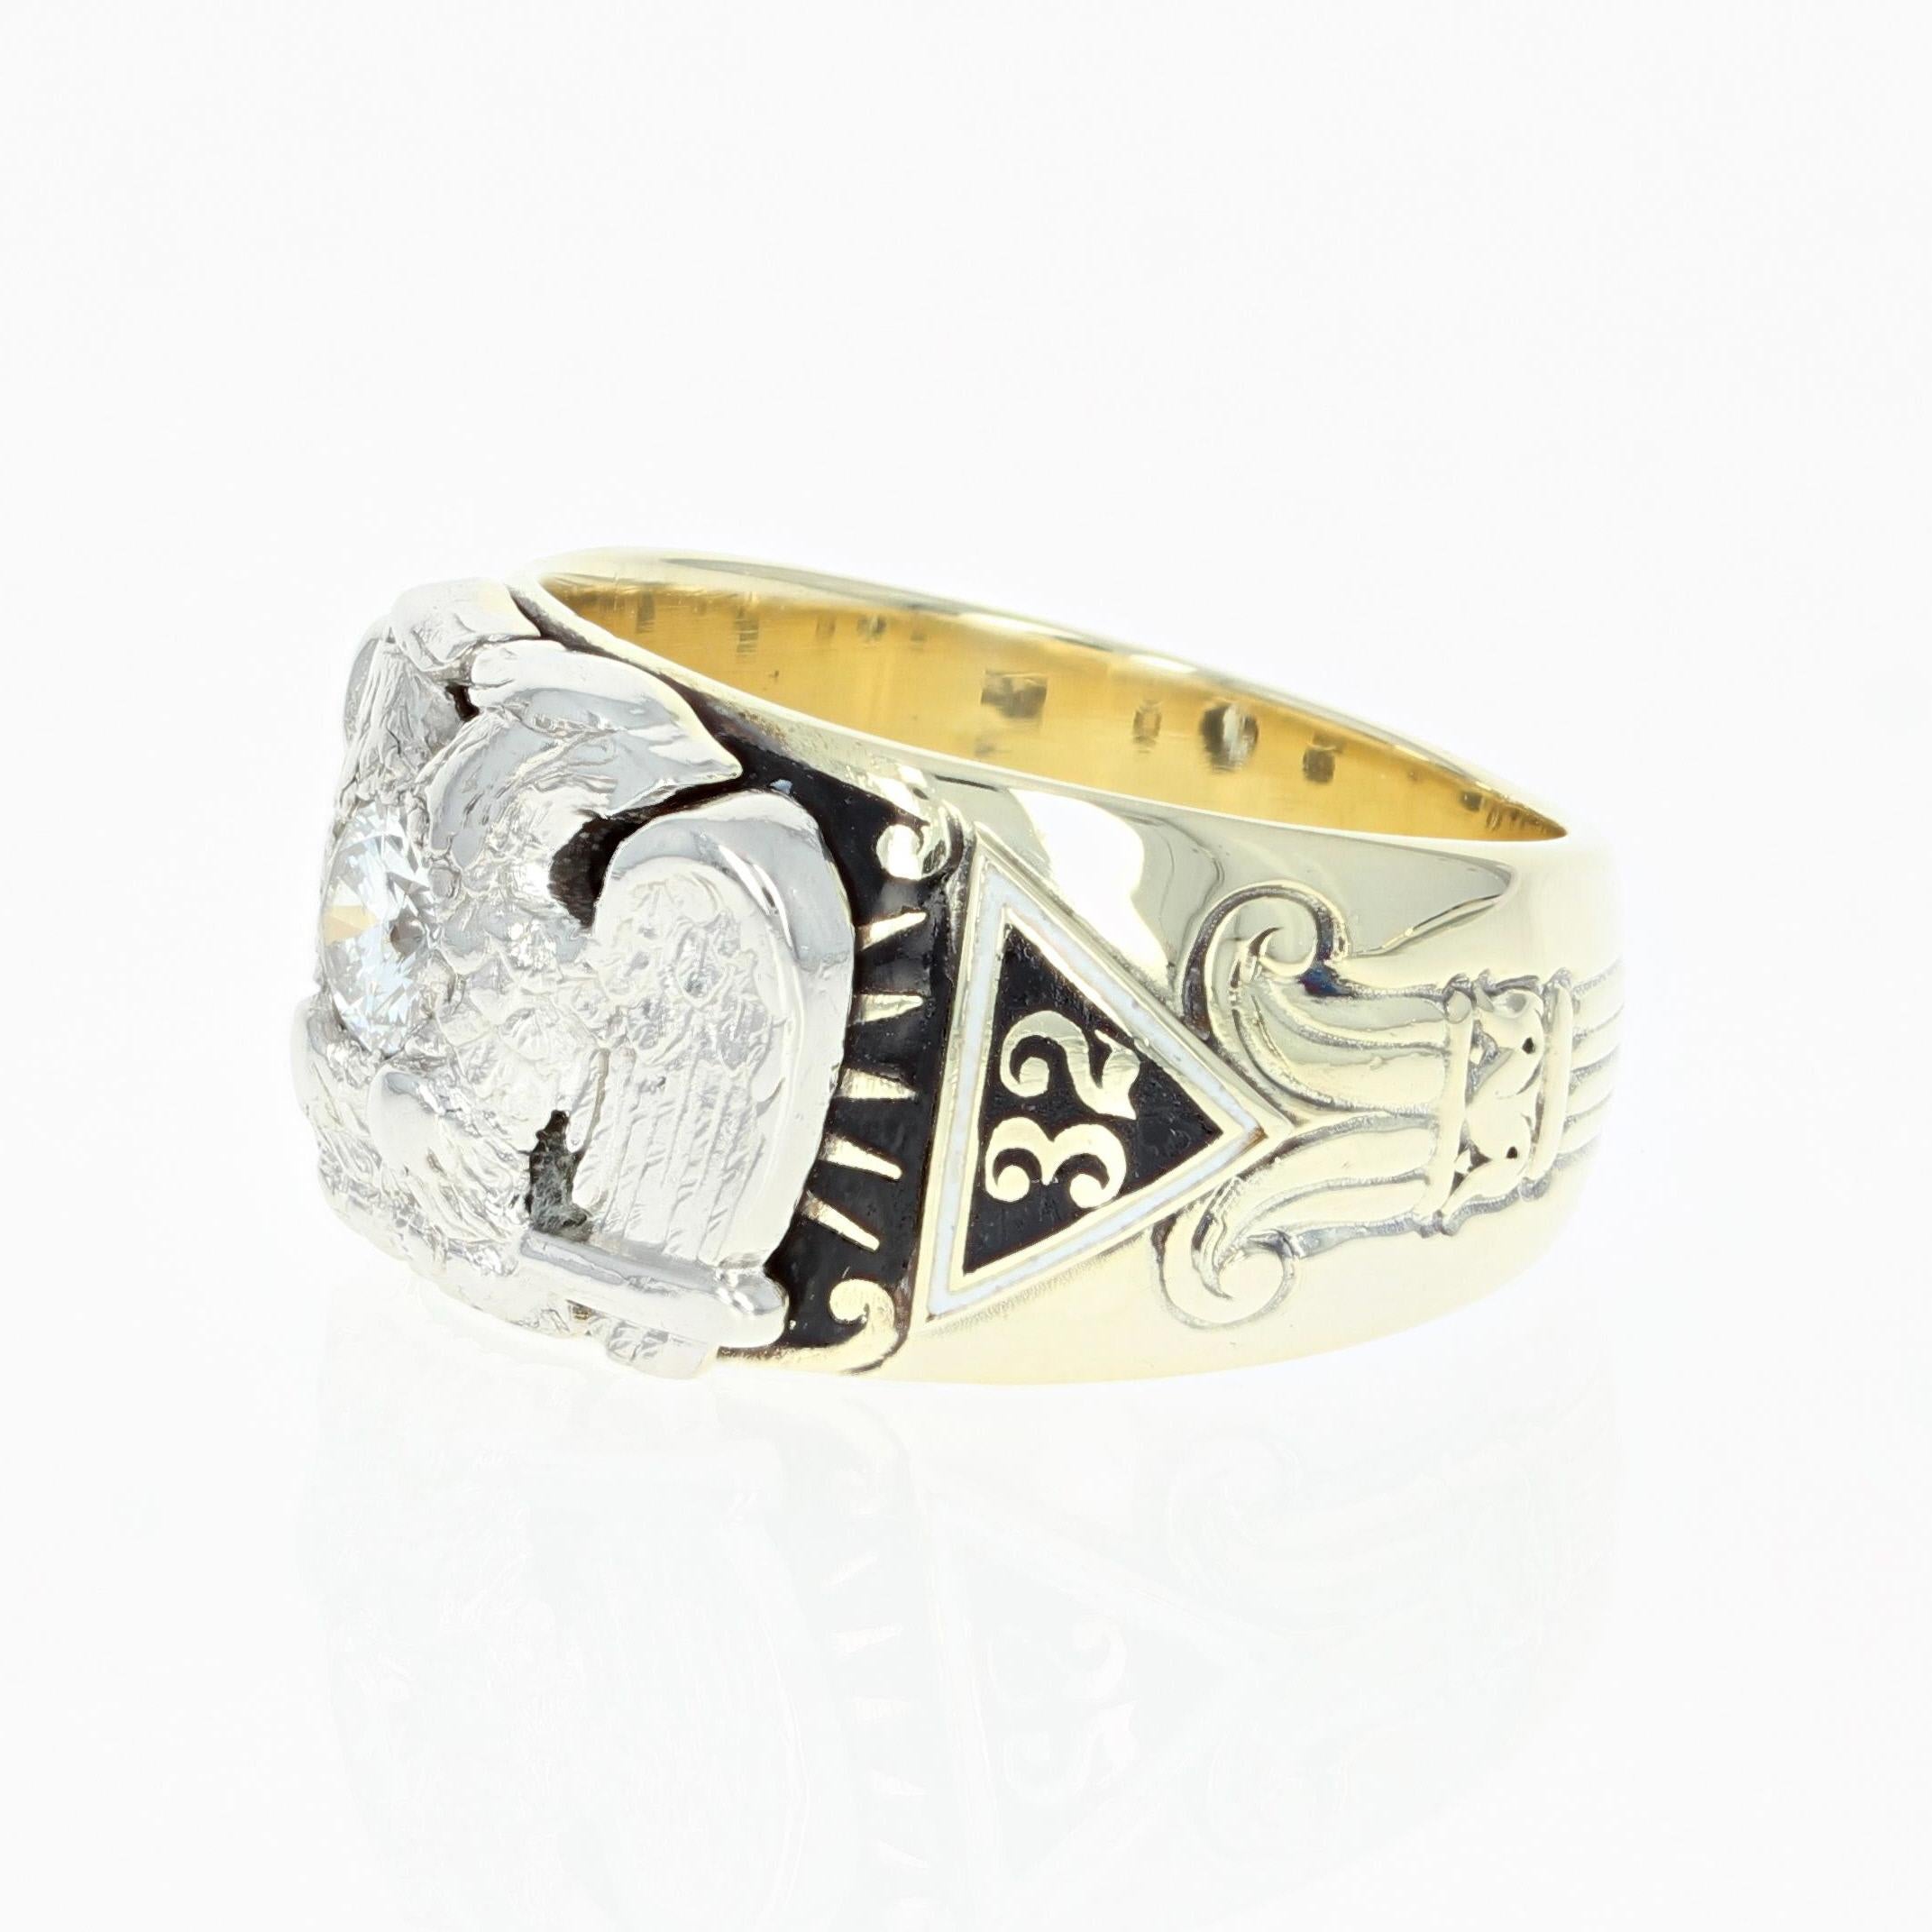 Crafted in 14k yellow gold, this vintage 32nd degree Scottish Rite ring features a platinum double-headed eagle displaying a radiant diamond solitaire. The ring’s shoulders showcase inverted triangles set with the number 32 and a Yod symbol